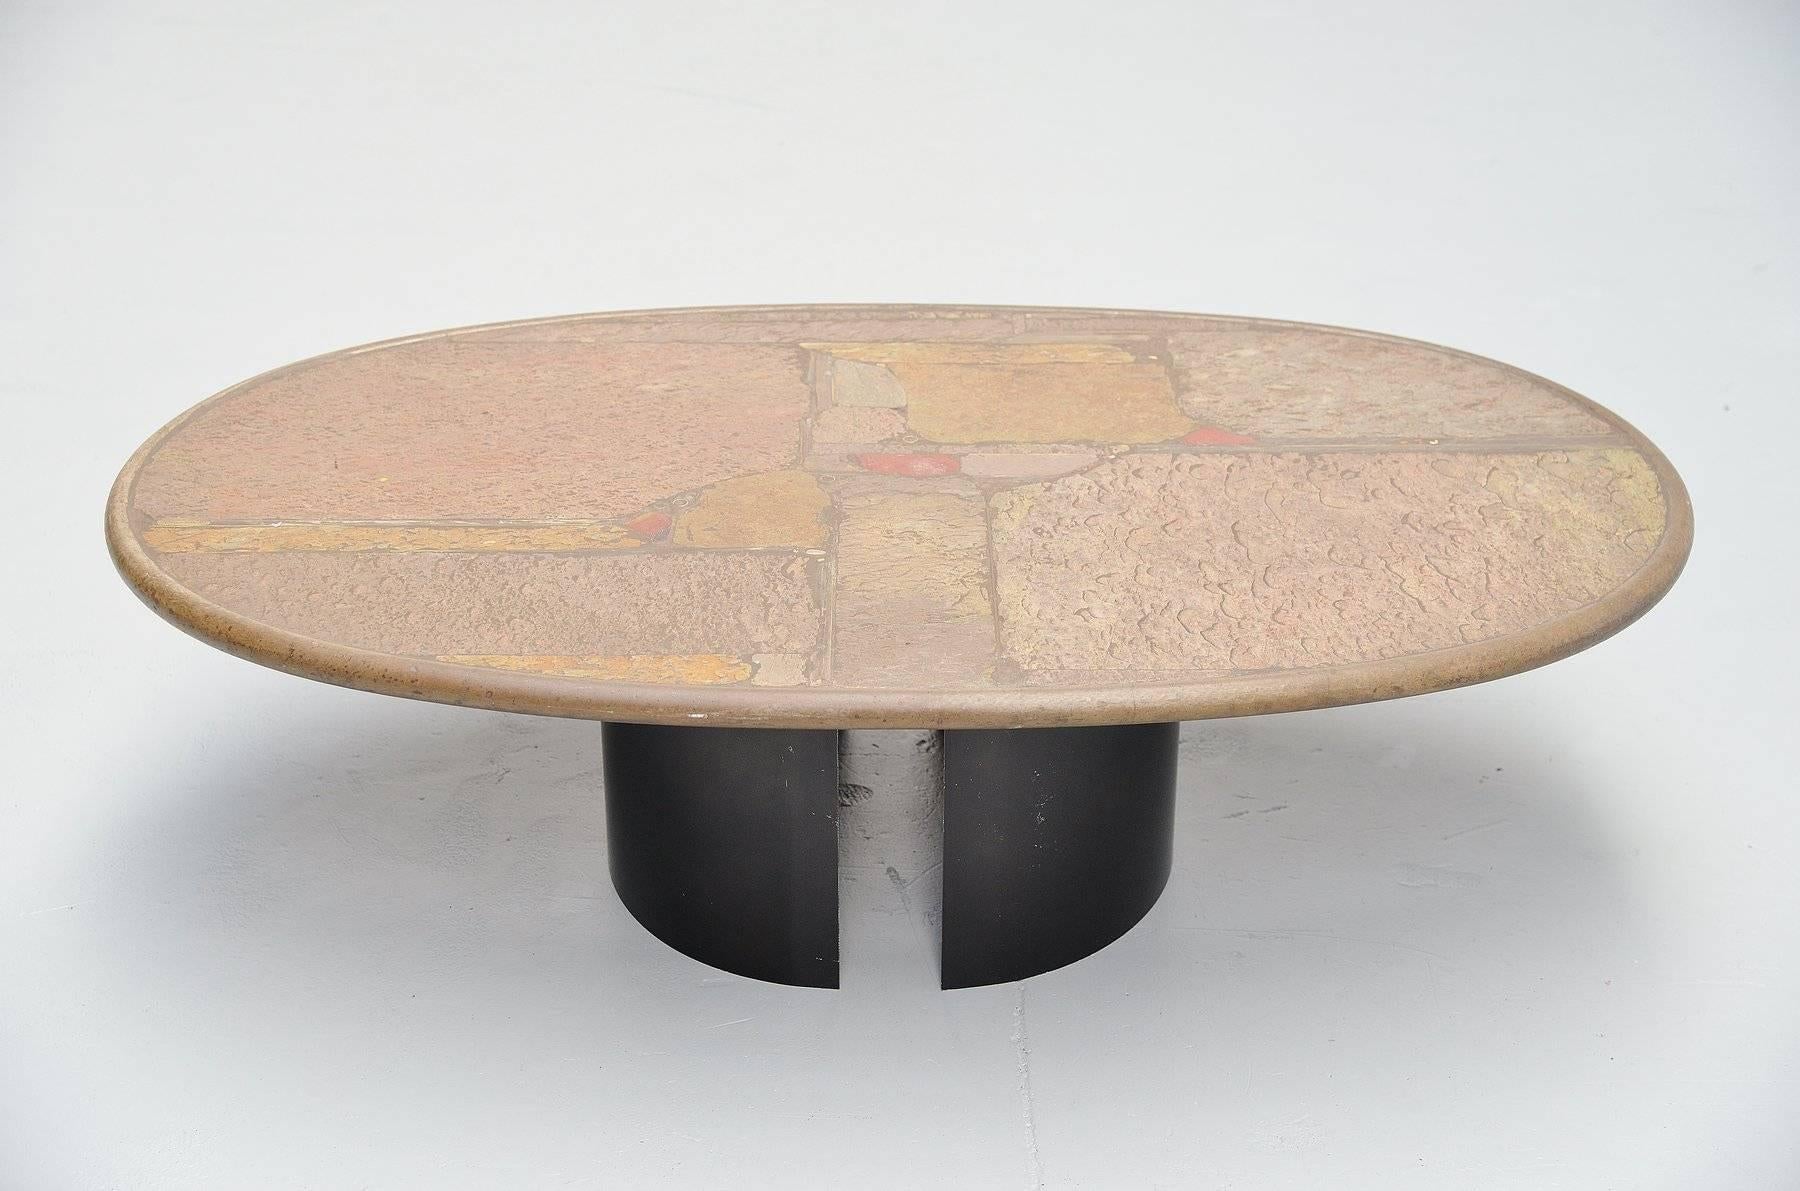 Very nice one off oval shaped coffee table designed and made by Paul Kingma, Holland 1993. Paul Kingma was well known for his architectural tables that pay a tribute to the riches of Nature by traveling extensively in search of rare materials,